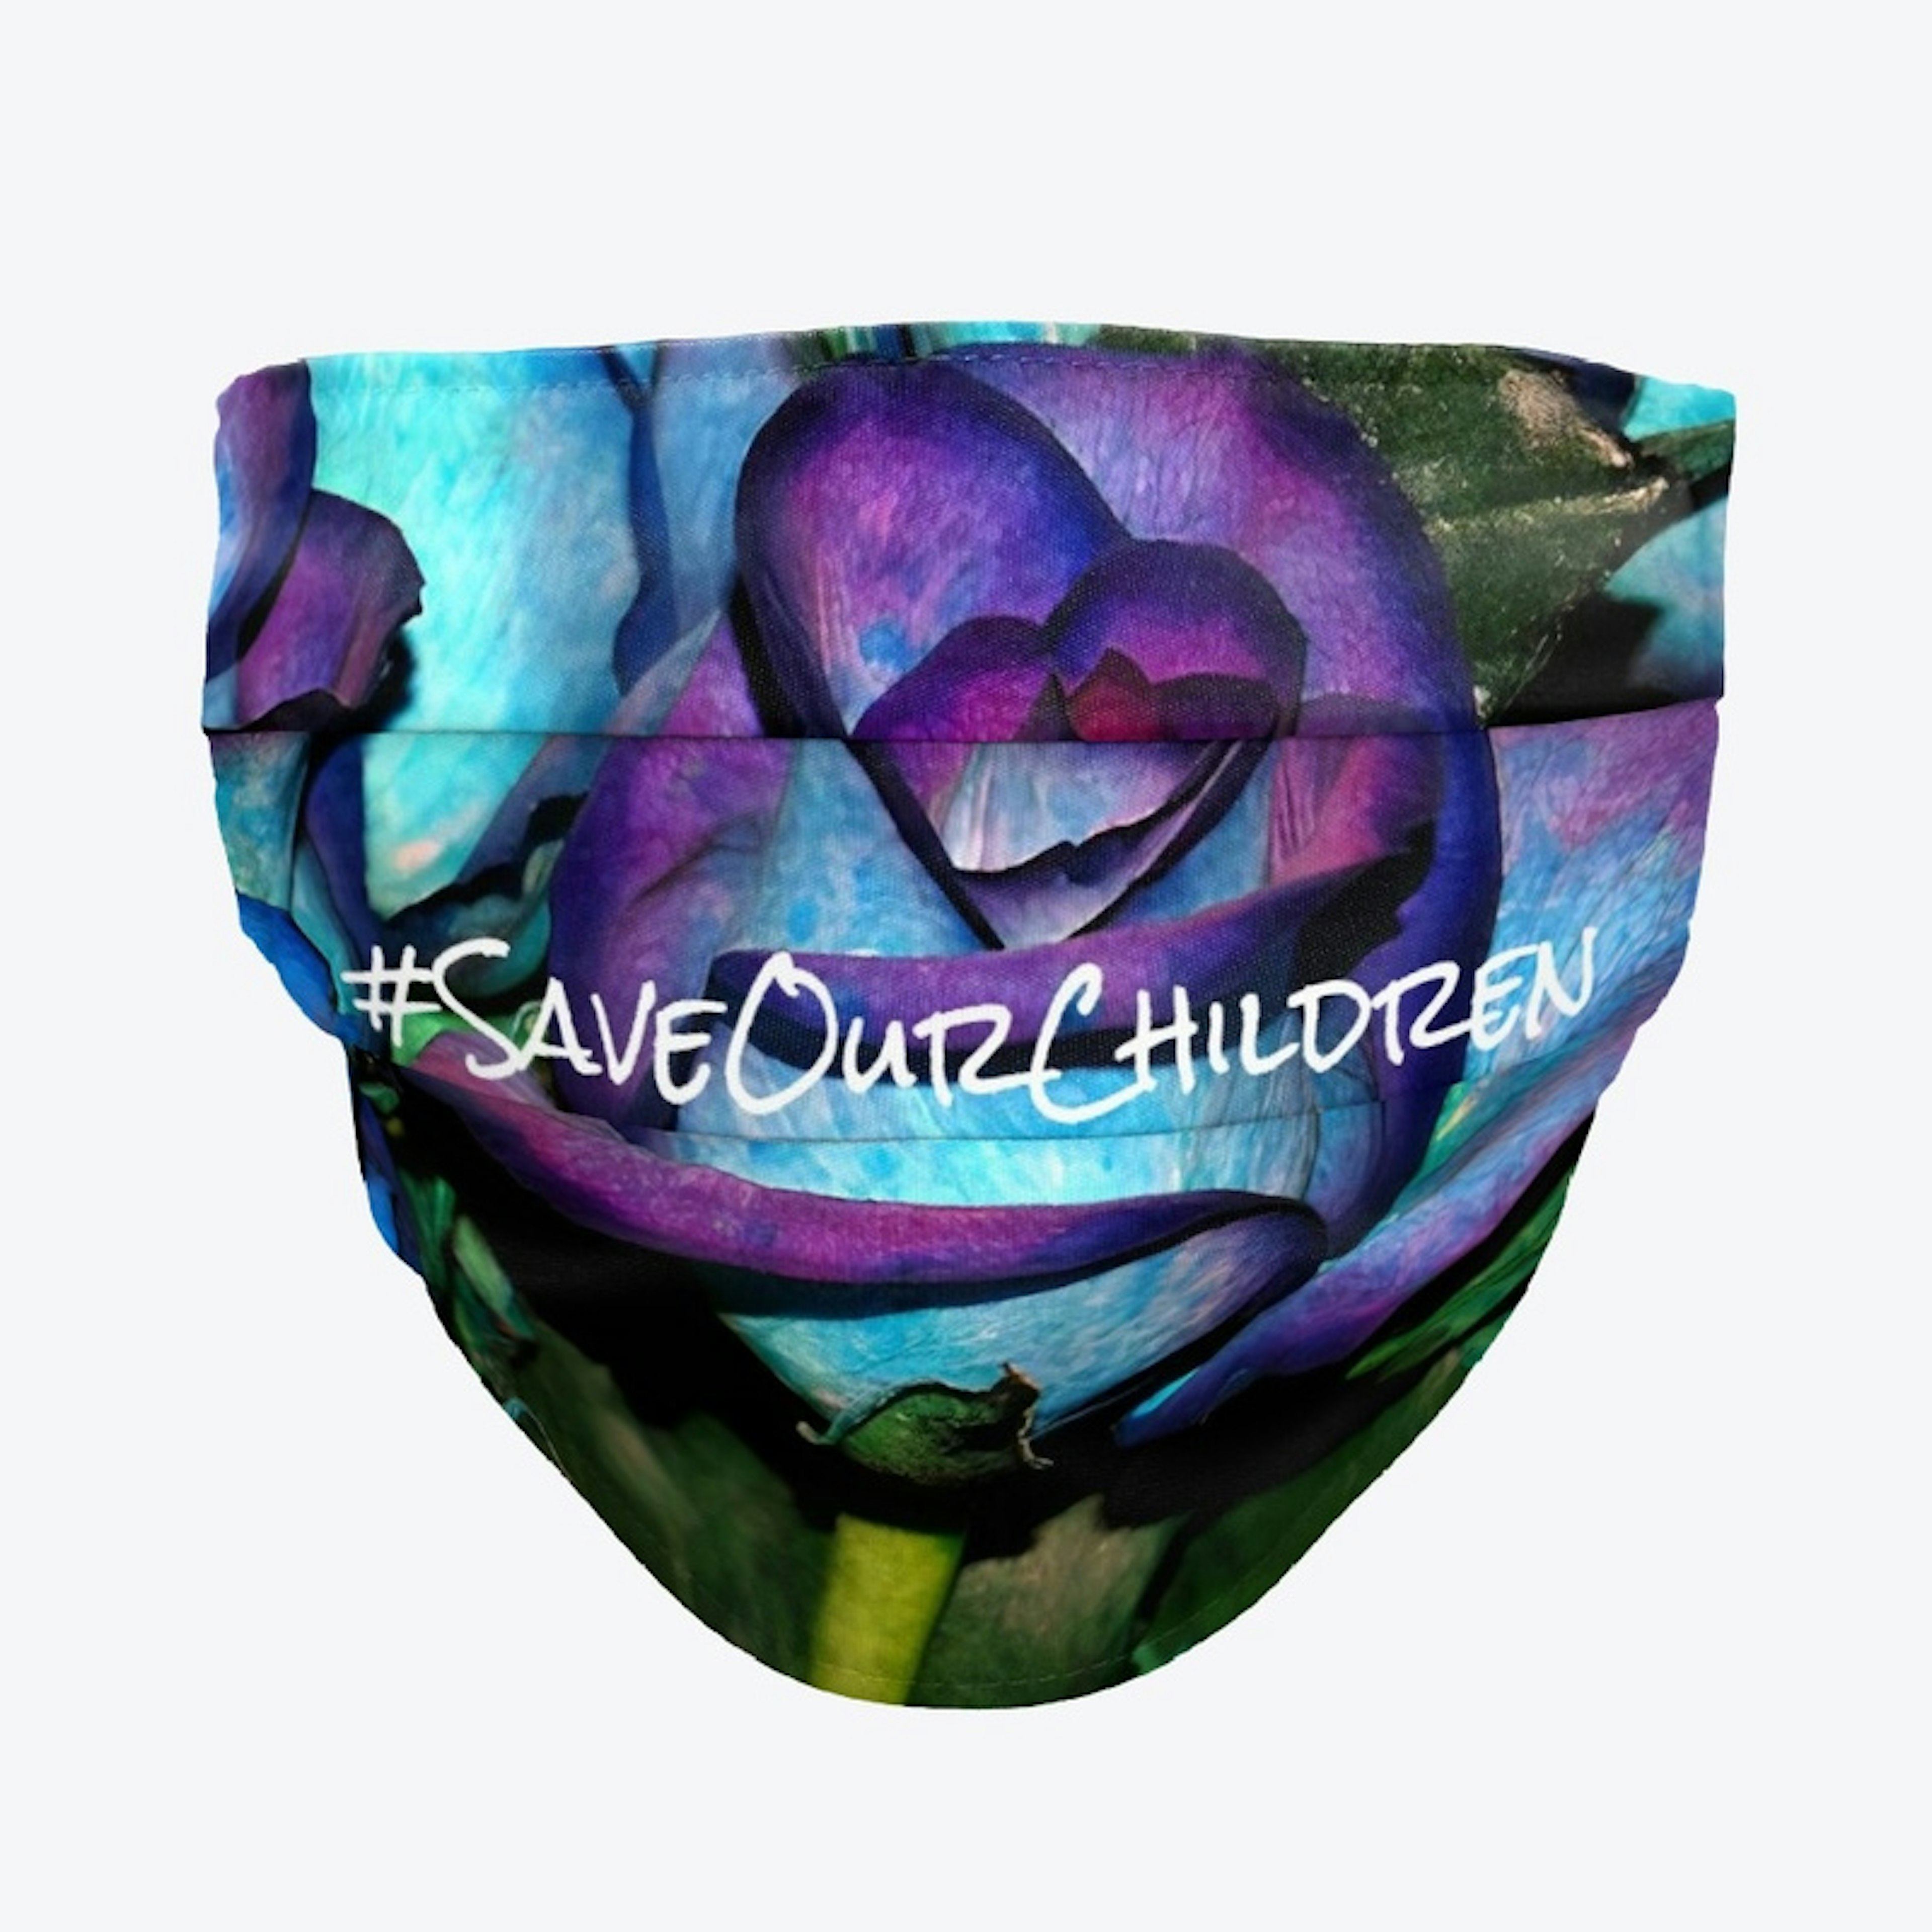 Save Our Children - Roses